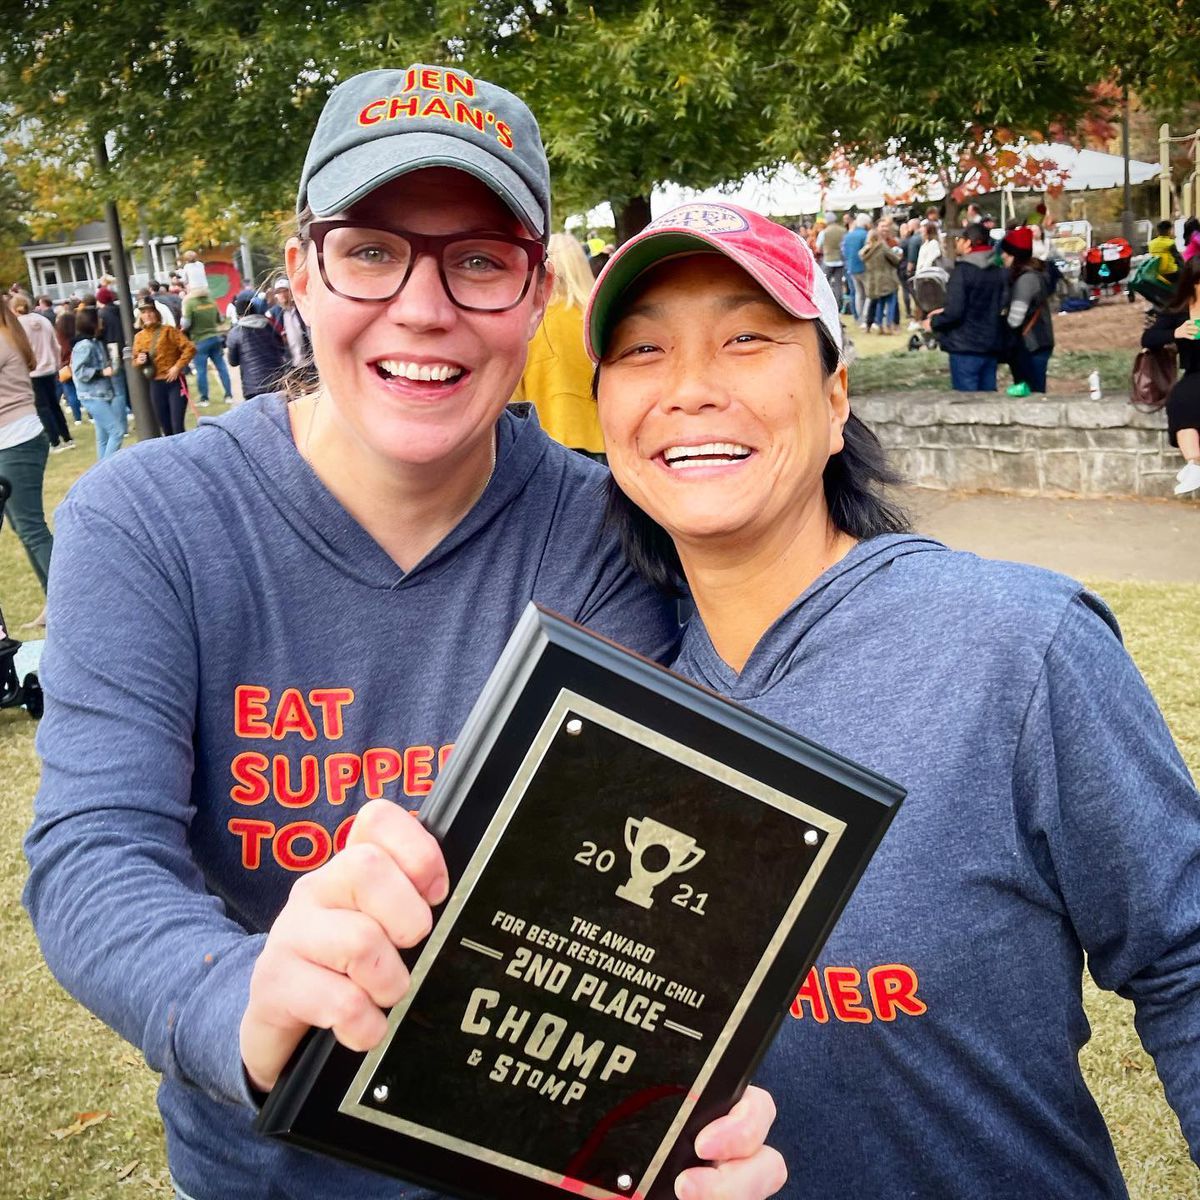 Emily and Jen Chan, owners of JenChan’s restaurant in Cabbagetown, joyously posing with their 2nd place award for best chili at Chomp and Stomp Chili Cookoff Contest in 2021. 